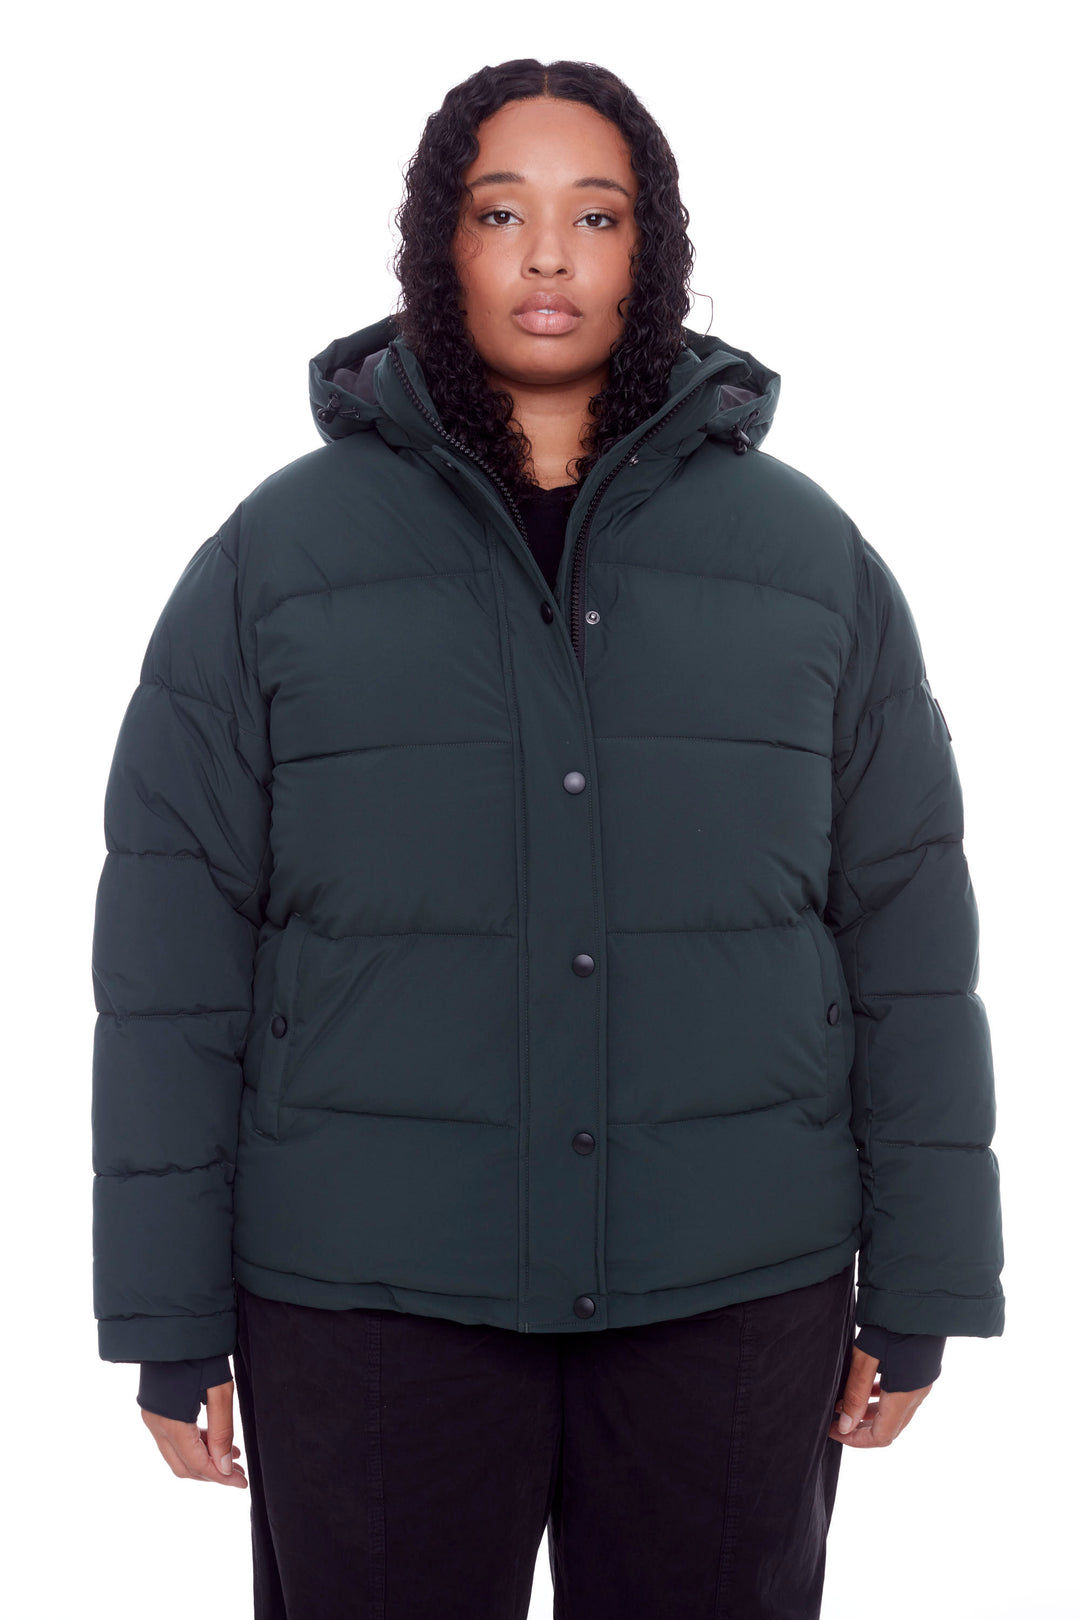 FORILLON PLUS | WOMEN'S VEGAN DOWN (RECYCLED) SHORT QUILTED PUFFER JACKET, DEEP GREEN (PLUS SIZE)